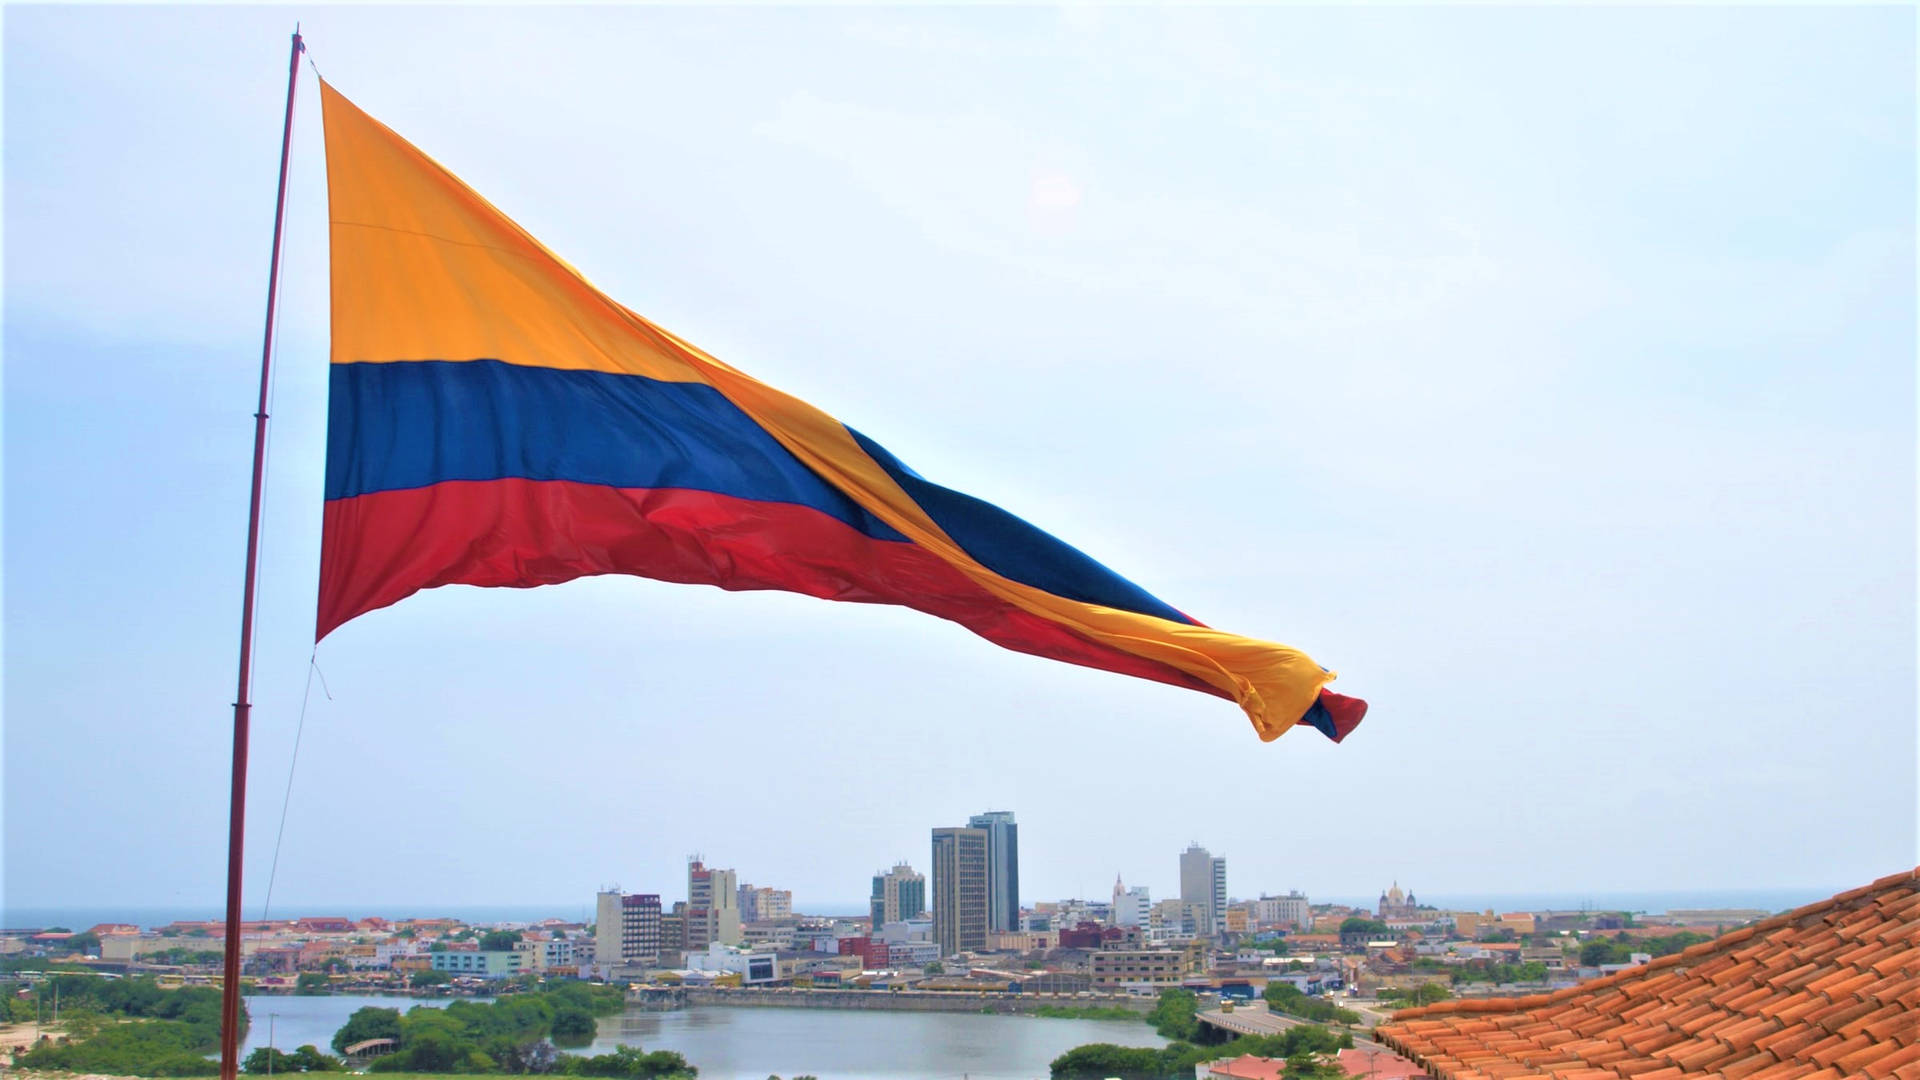 Caption: Vibrant Colombian flag waving proudly over a bustling cityscape. Wallpaper